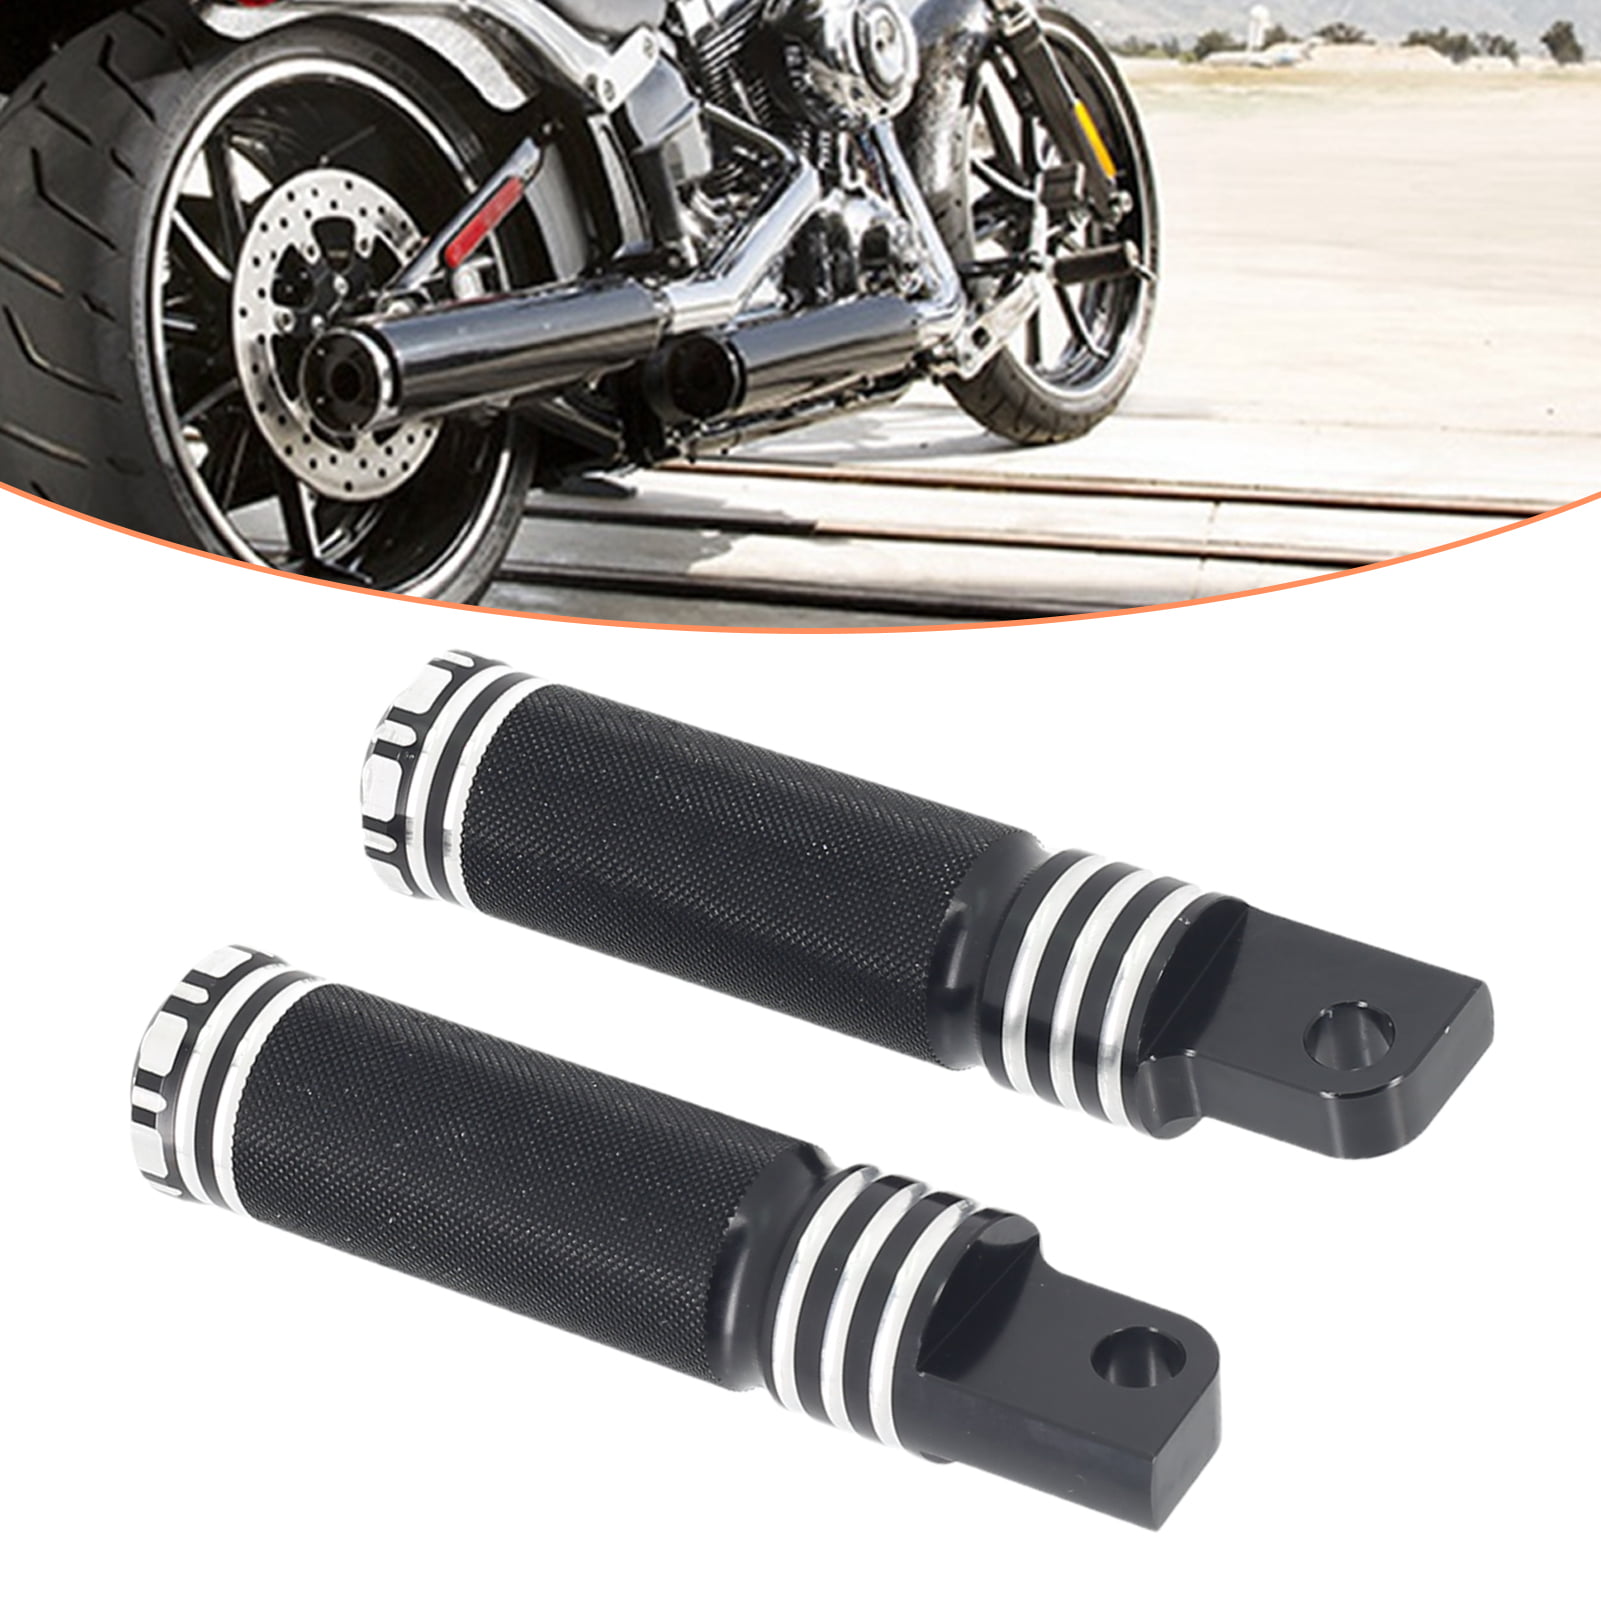 perfk CNC REAR FOOTREST FOOT REST PEGS for Harley XL883 1200 Black 